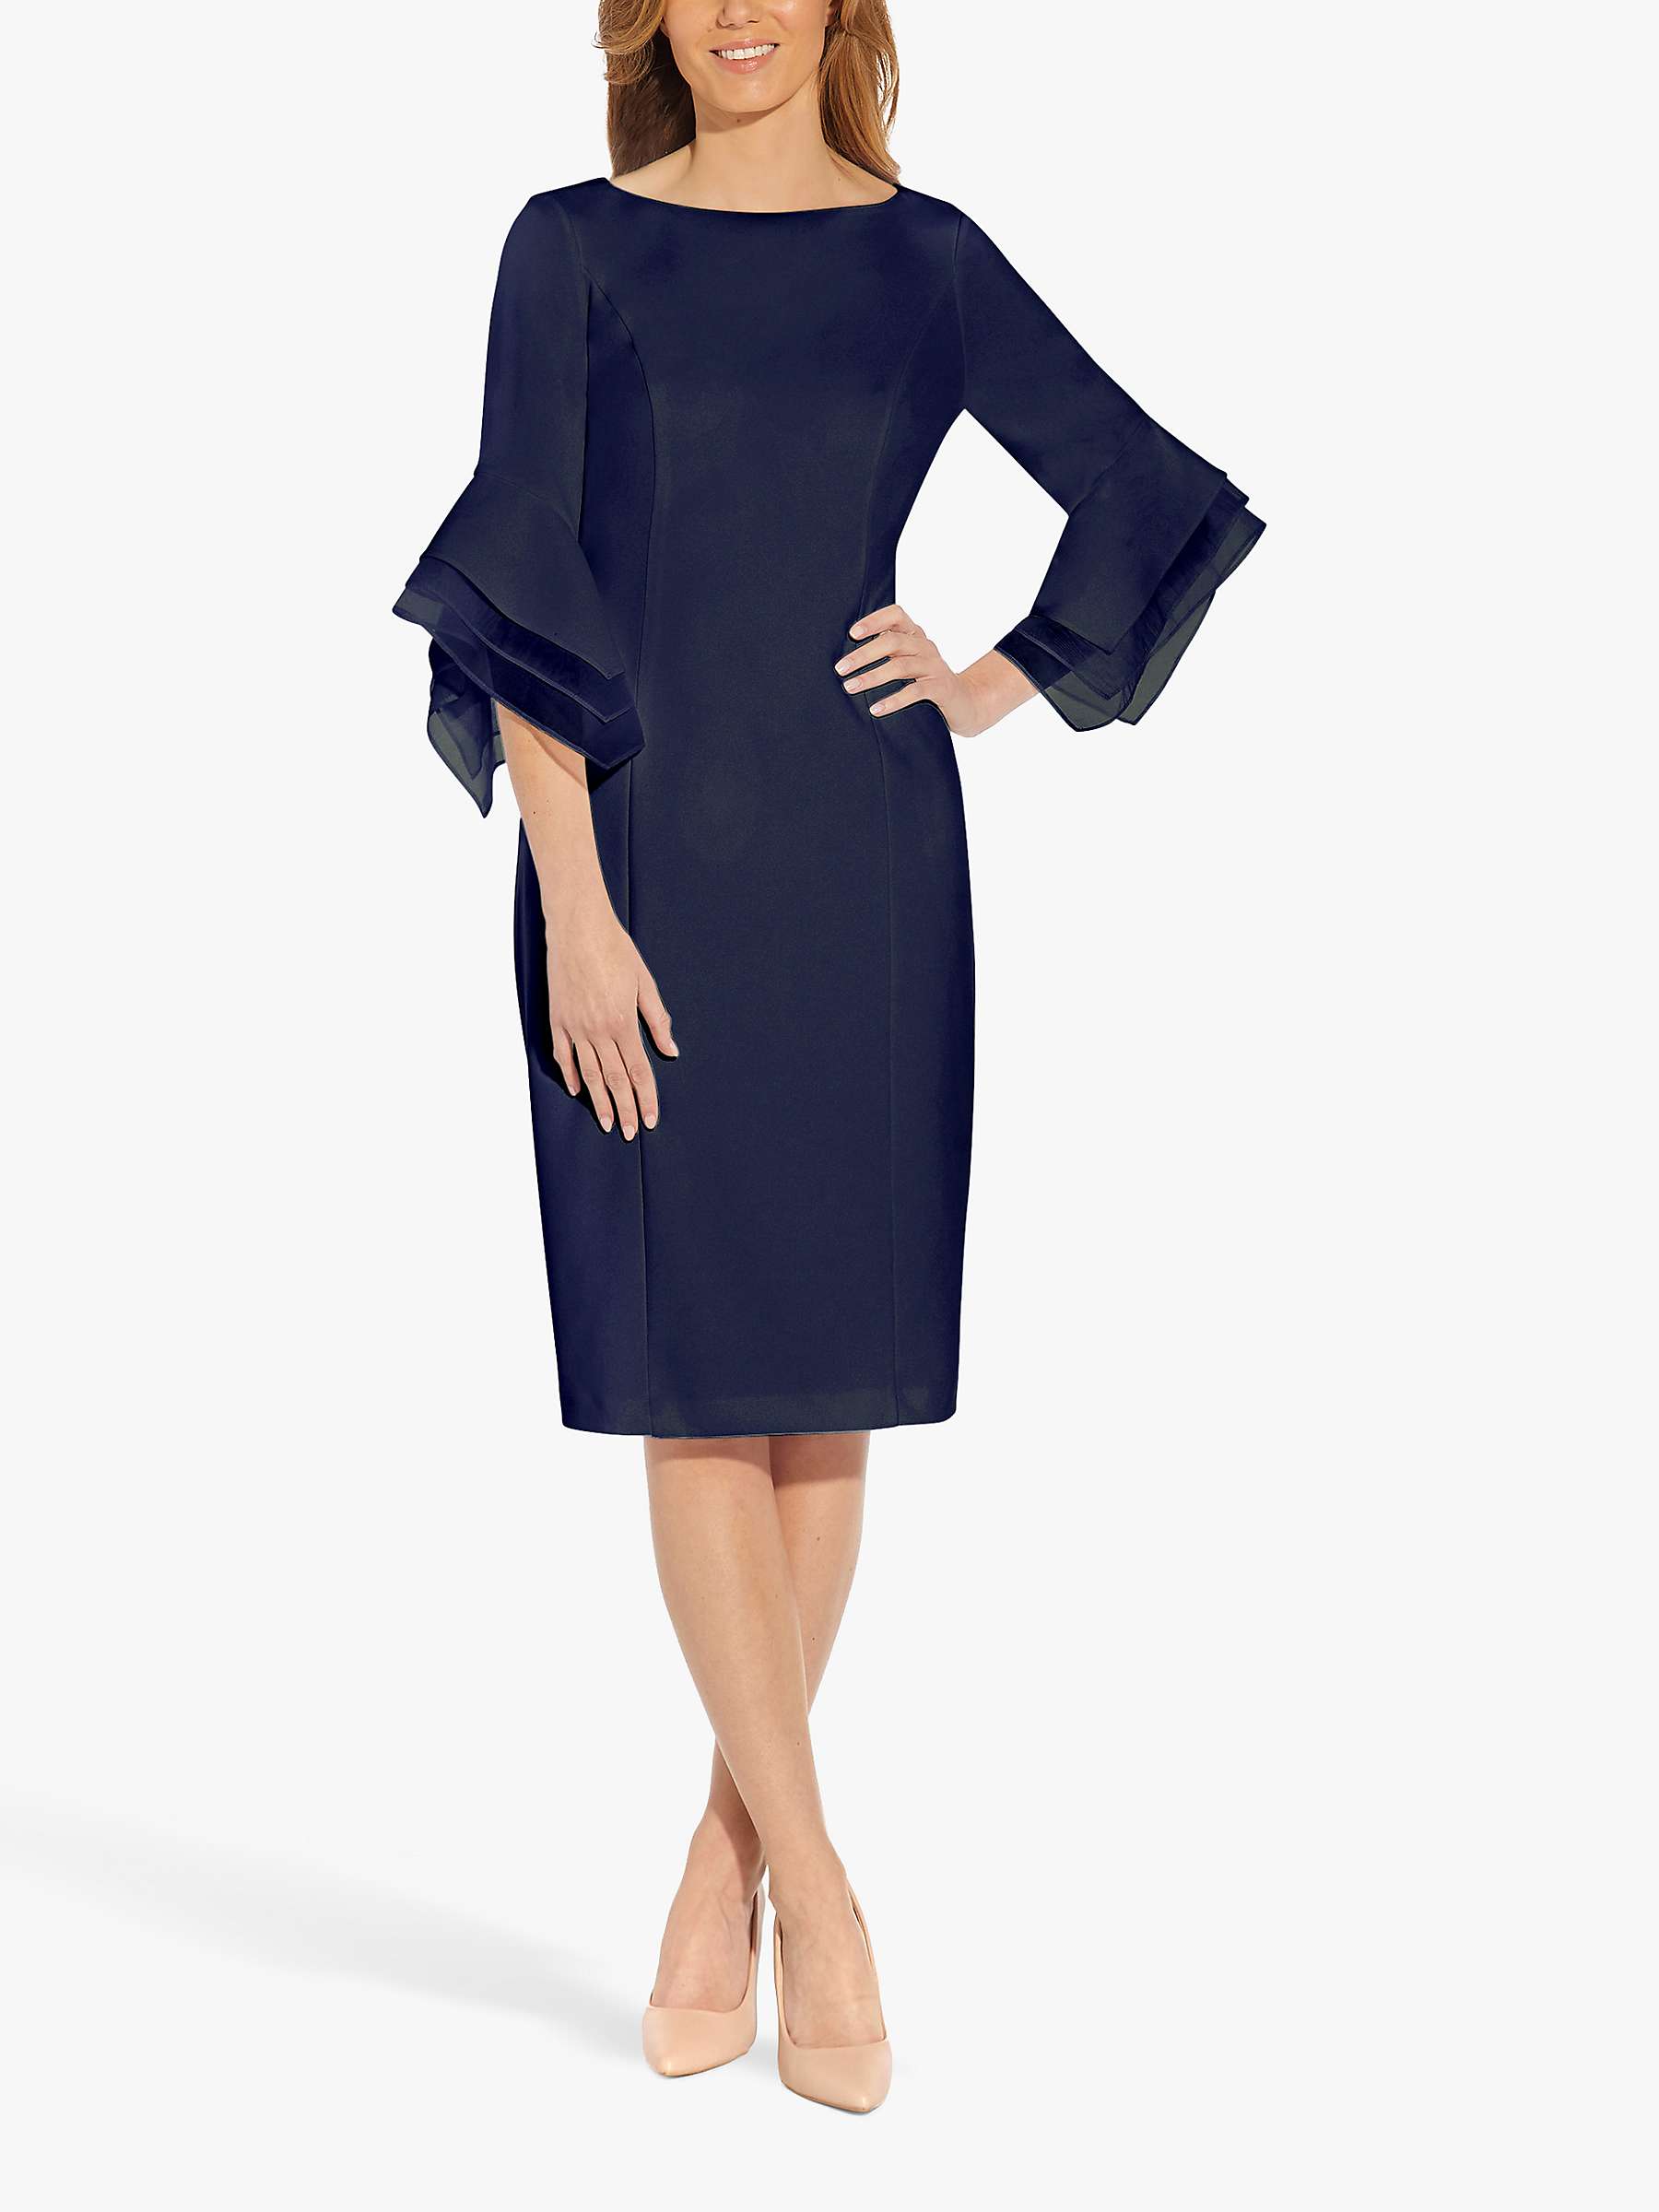 Buy Adrianna Papell Crepe Tailored Dress Online at johnlewis.com